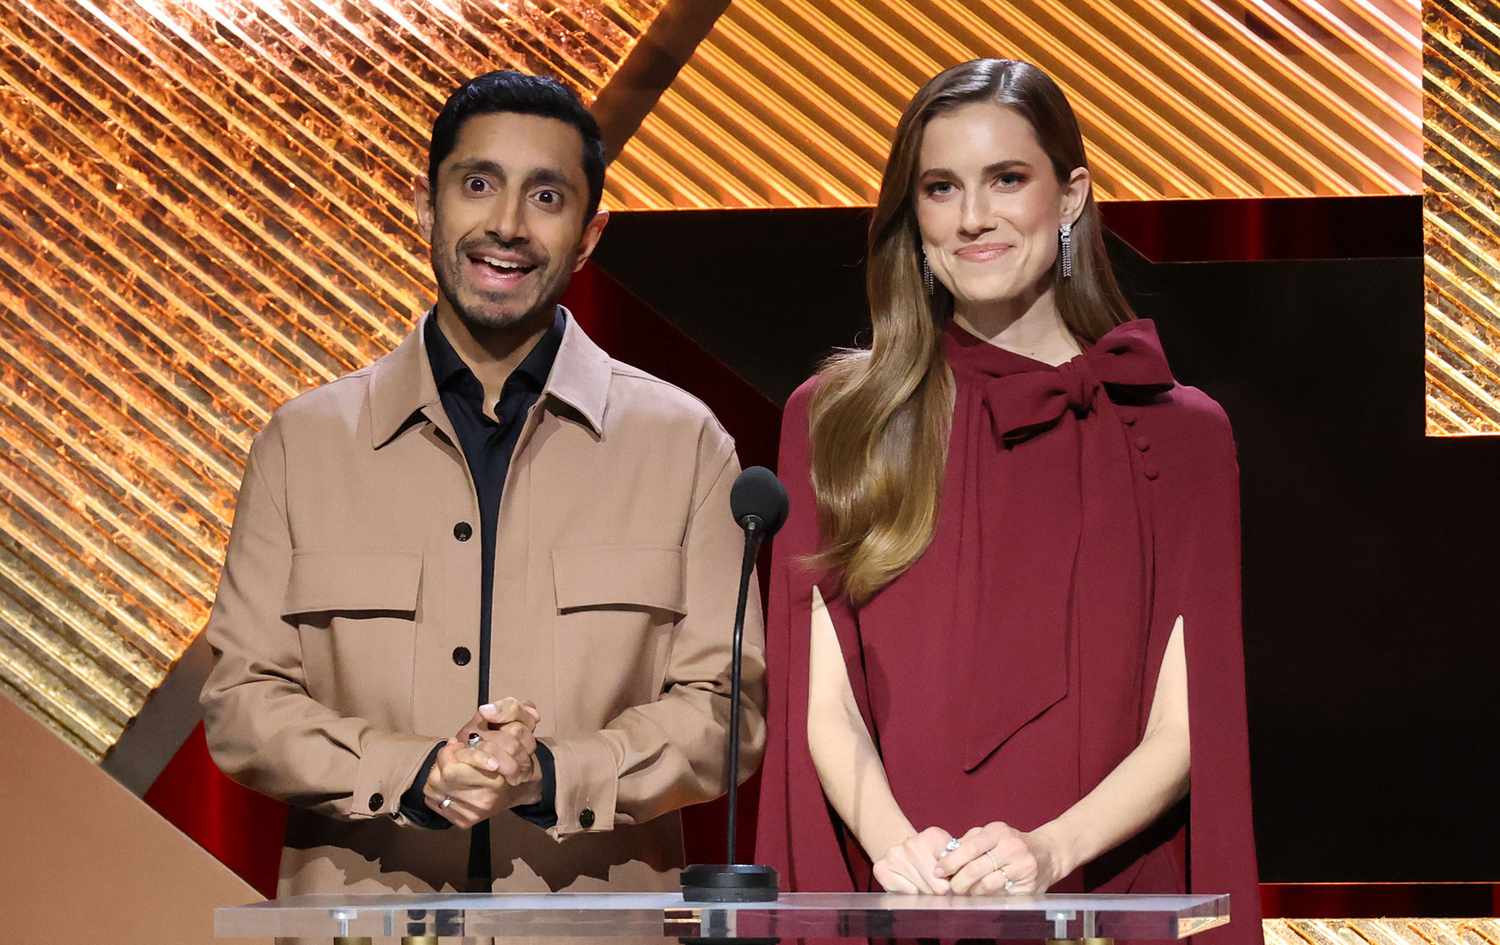 Riz Ahmed and Allison Williams speak onstage during the 95th Academy Award Nominations at Samuel Goldwyn Theater on January 24, 2023 in Beverly Hills, California.